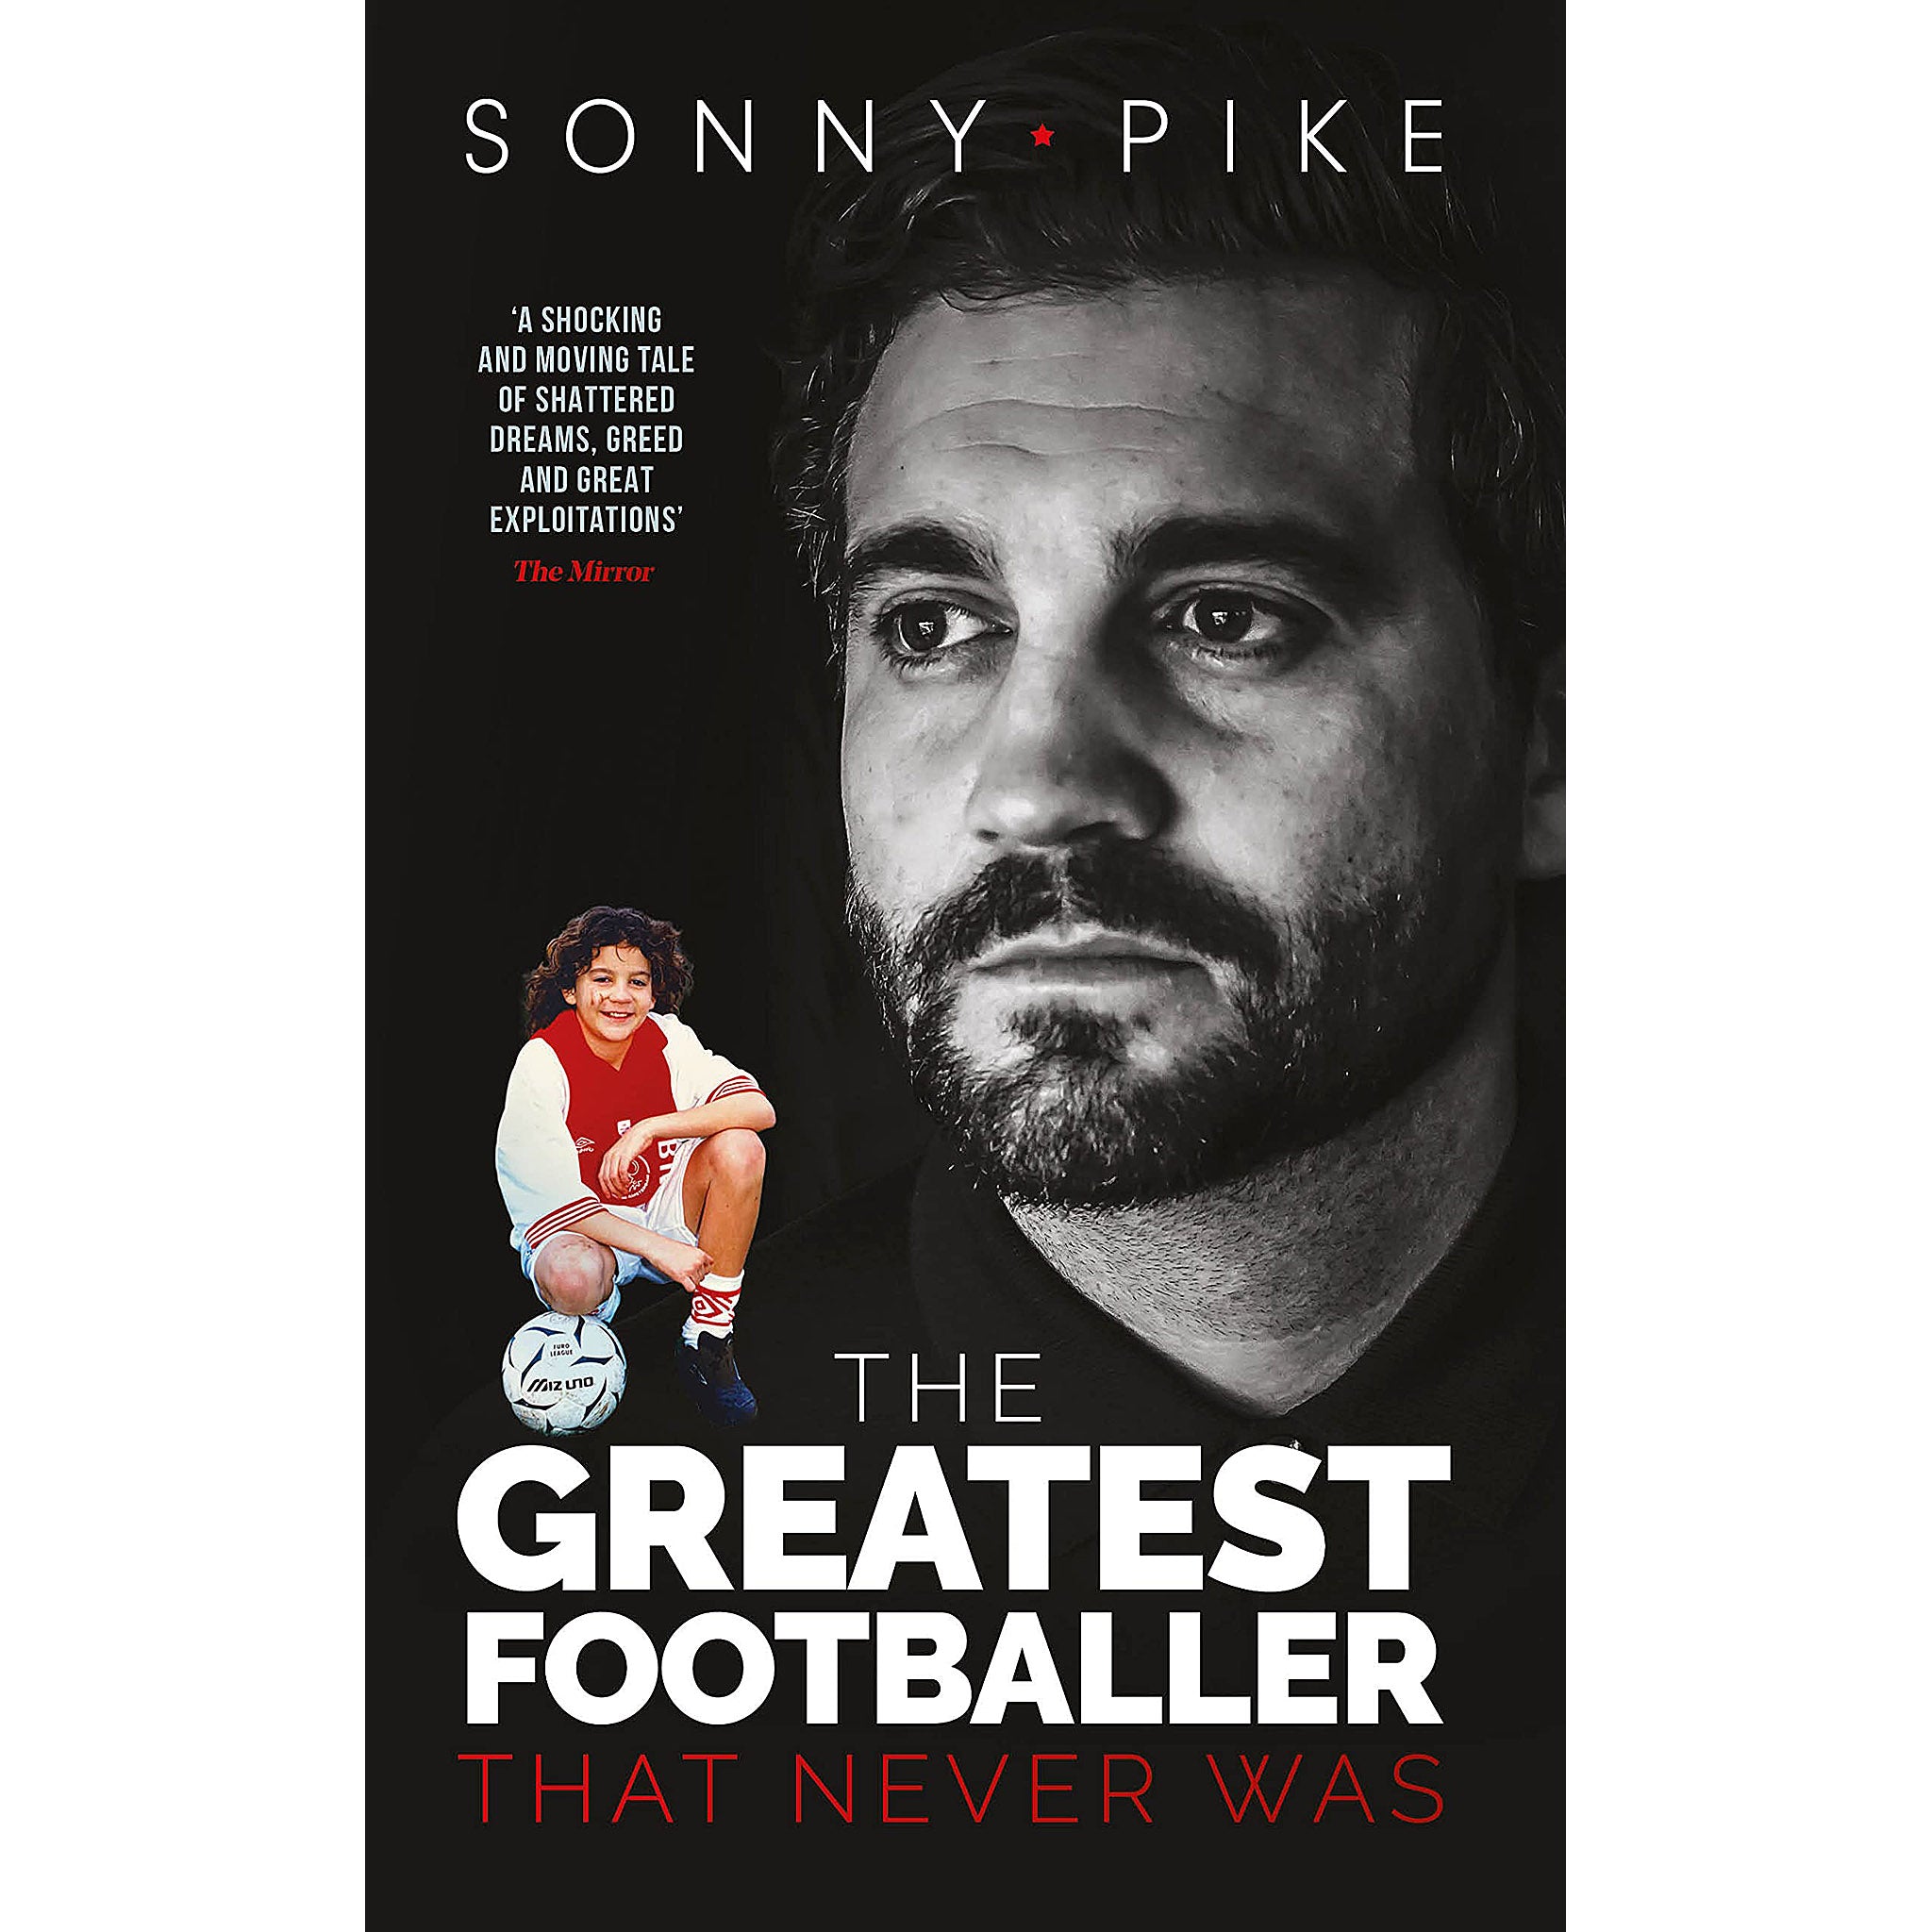 Sonny Pike – The Greatest Footballer That Never Was